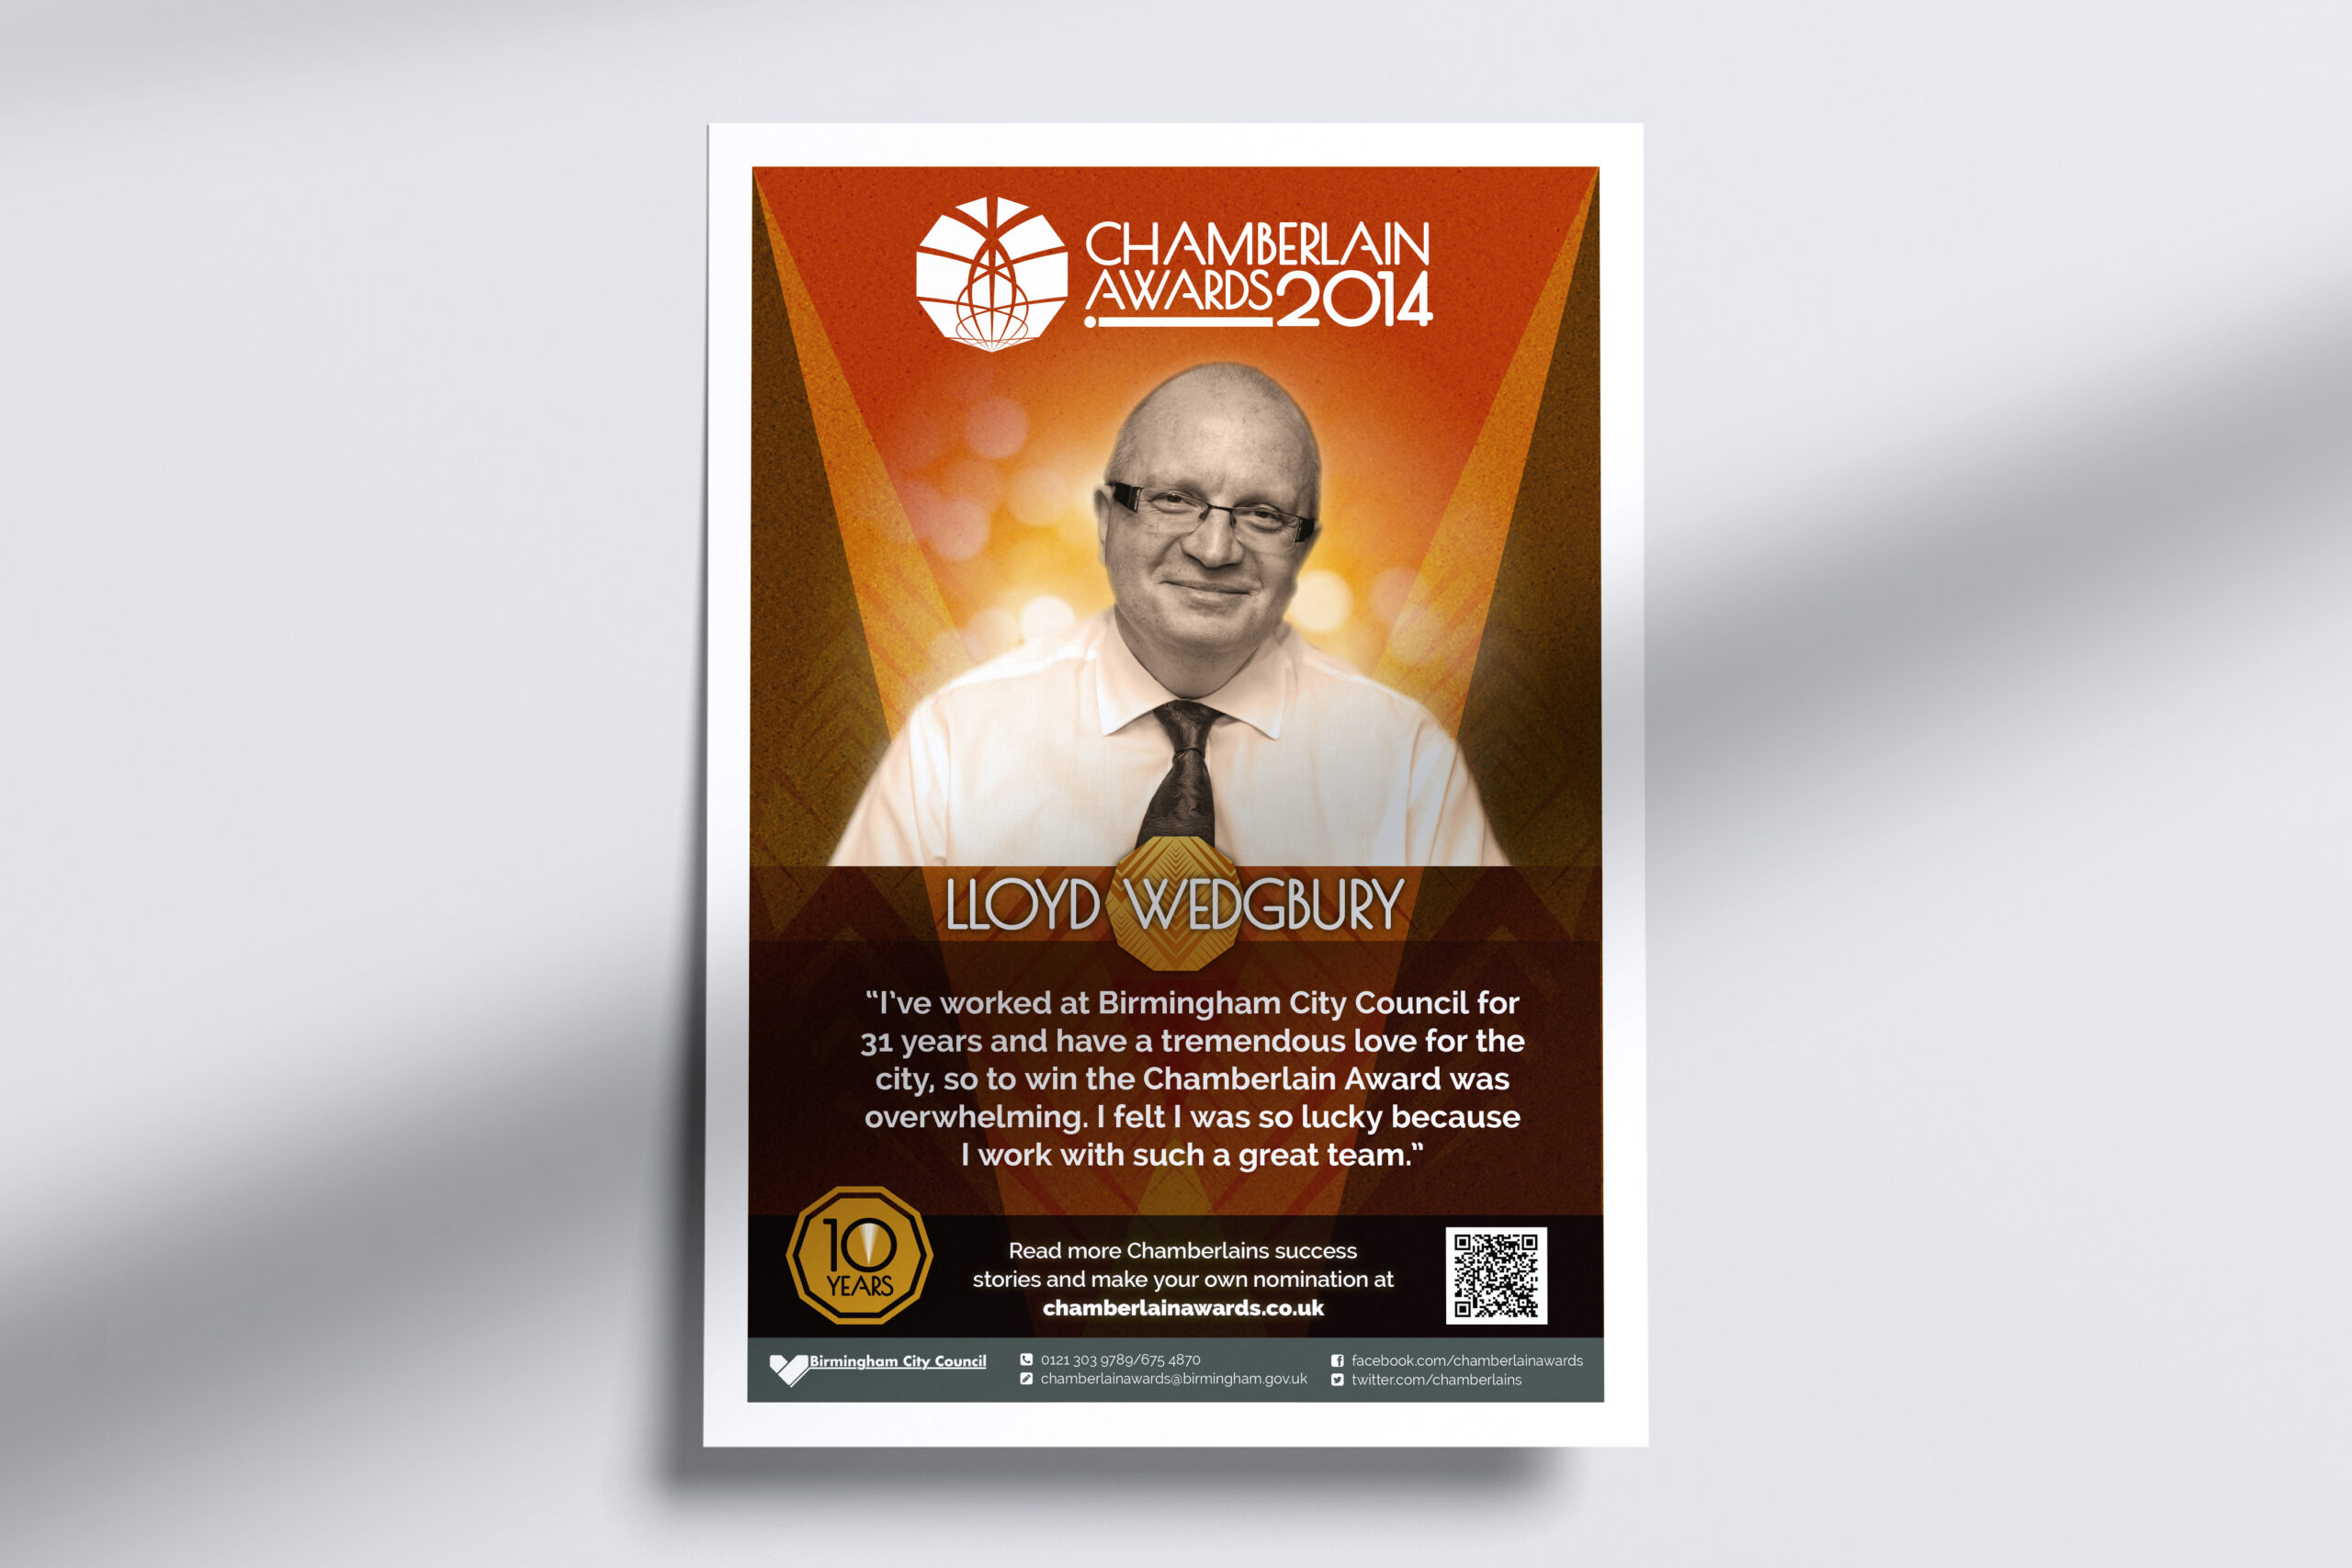 A promotional poster for the 2014 Chamberlain Awards is shown on a light-coloured wall. The poster shows an image and quote from previous award winner Lloyd Wedgbury